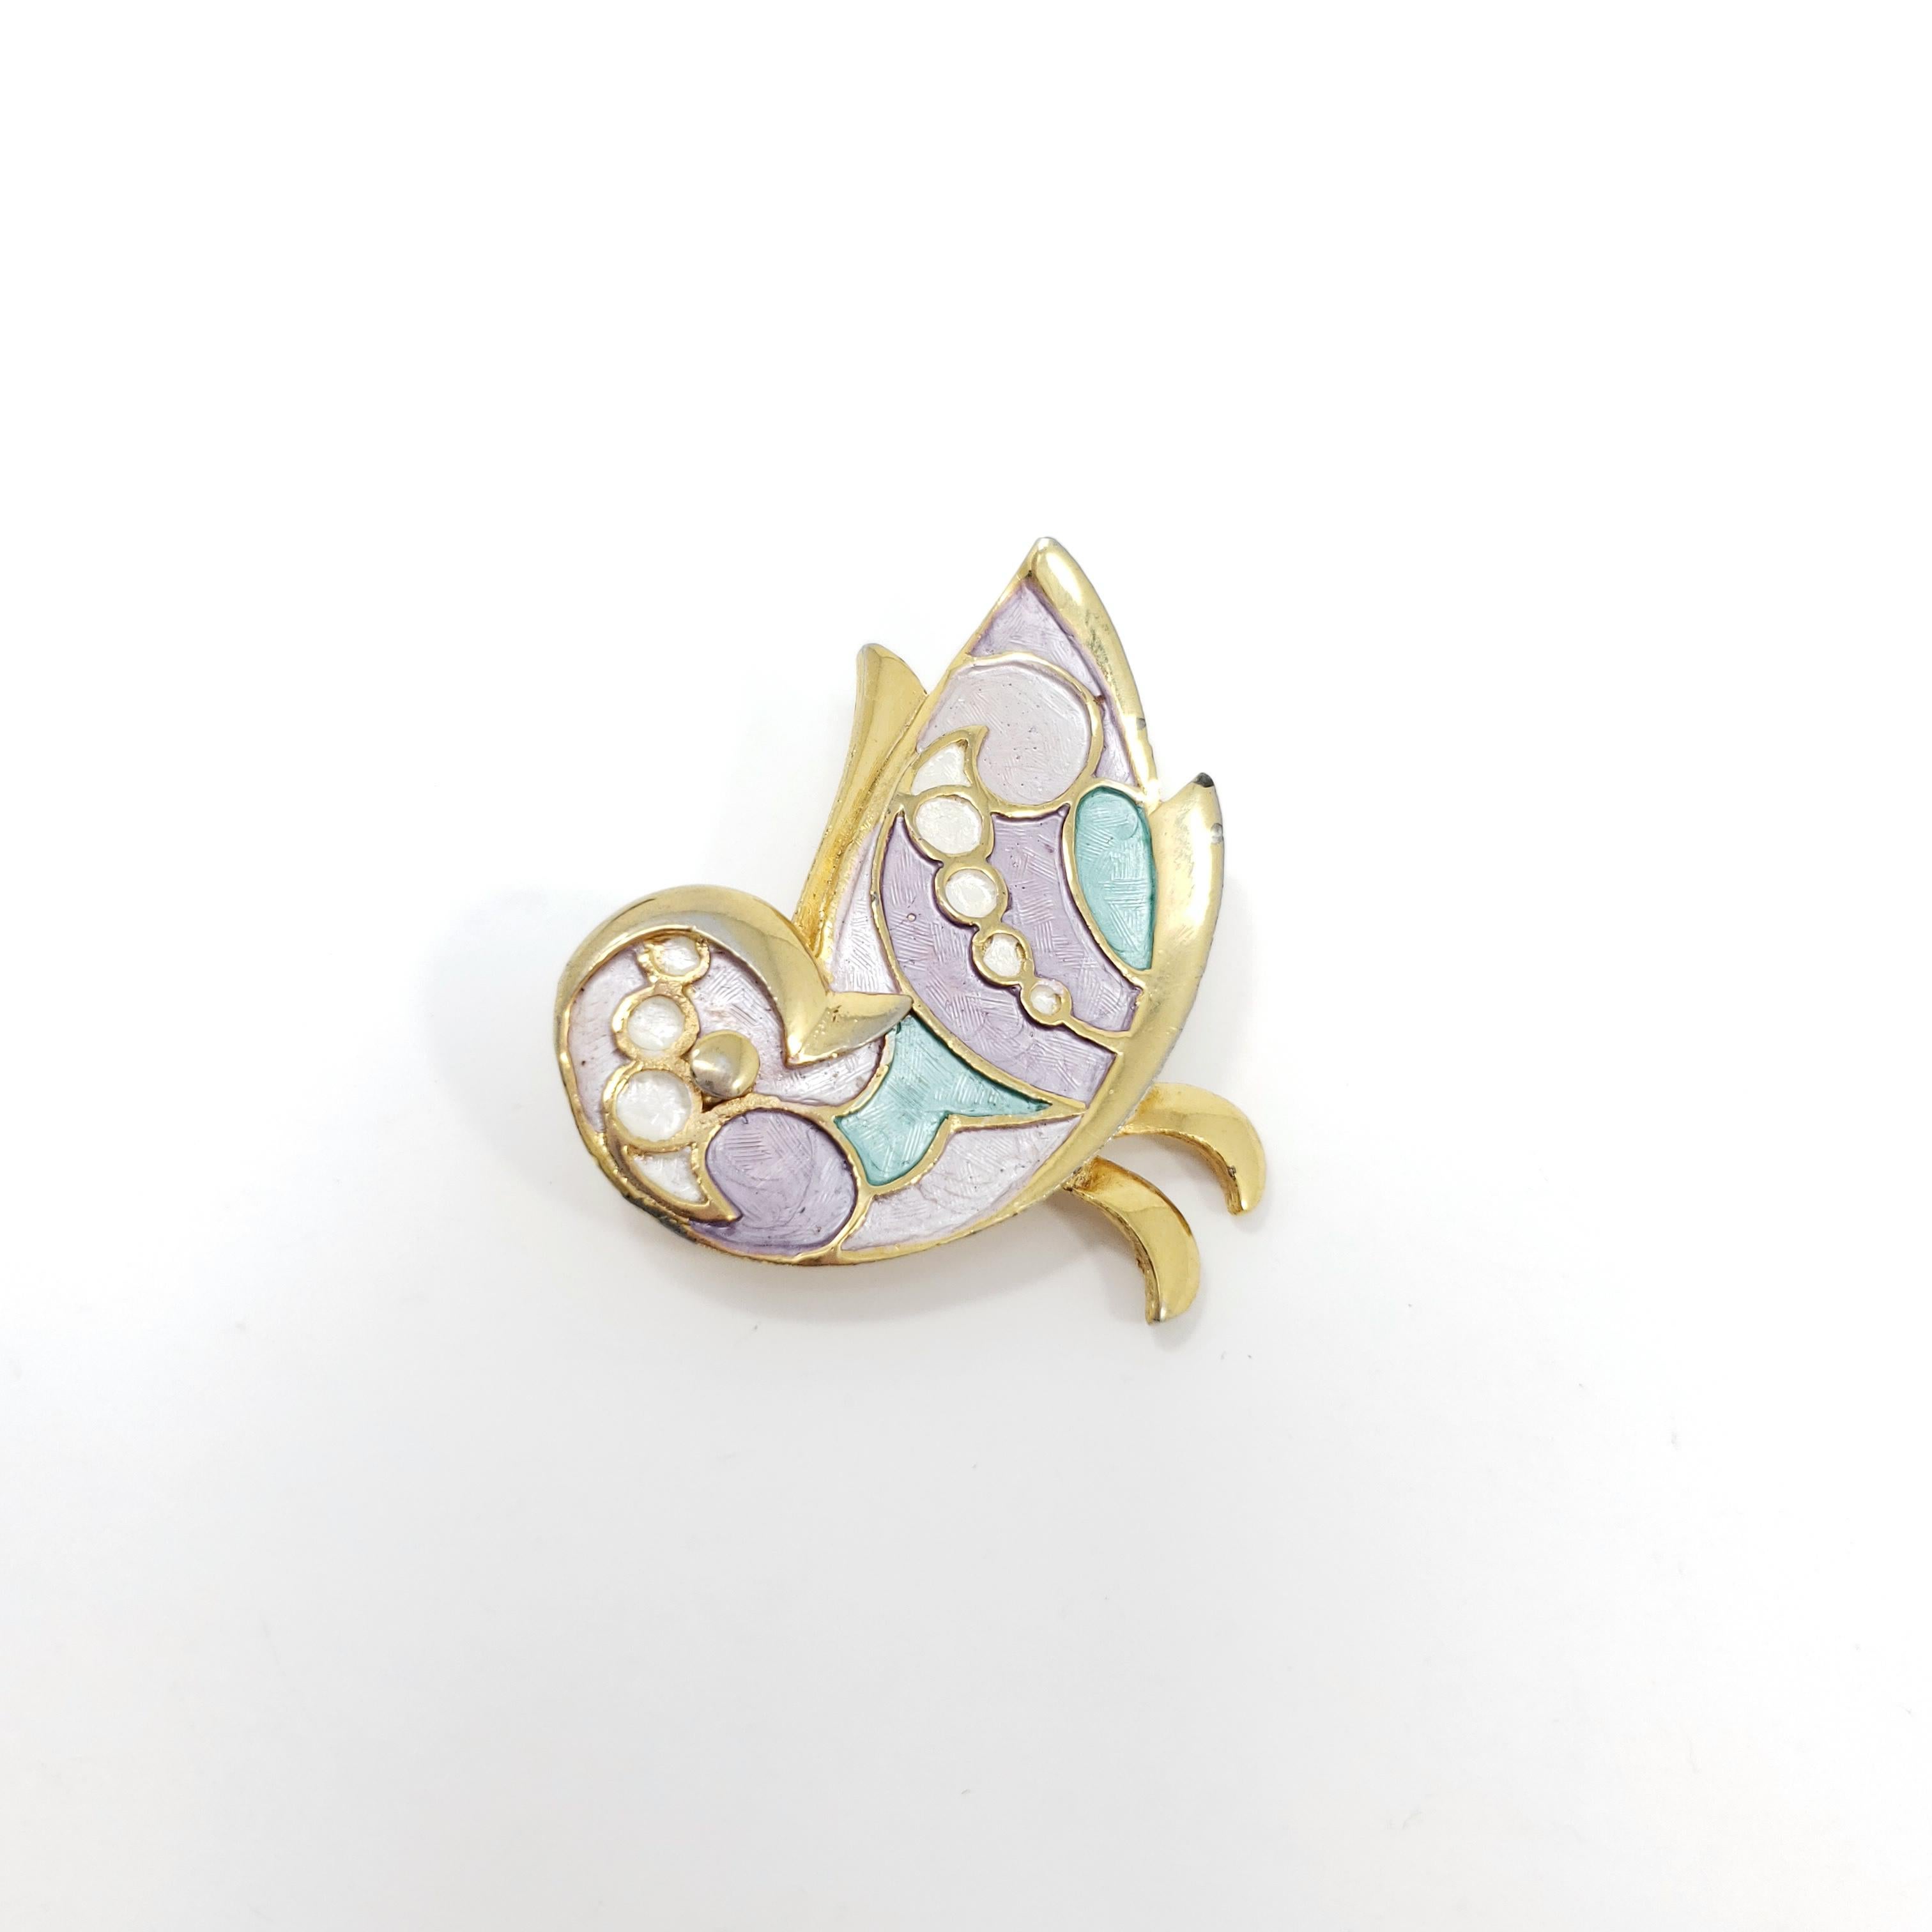 A stylish golden bird! This elegant accessory features textured enamel inlays in lilac, teal, and white.

Gold-filled.